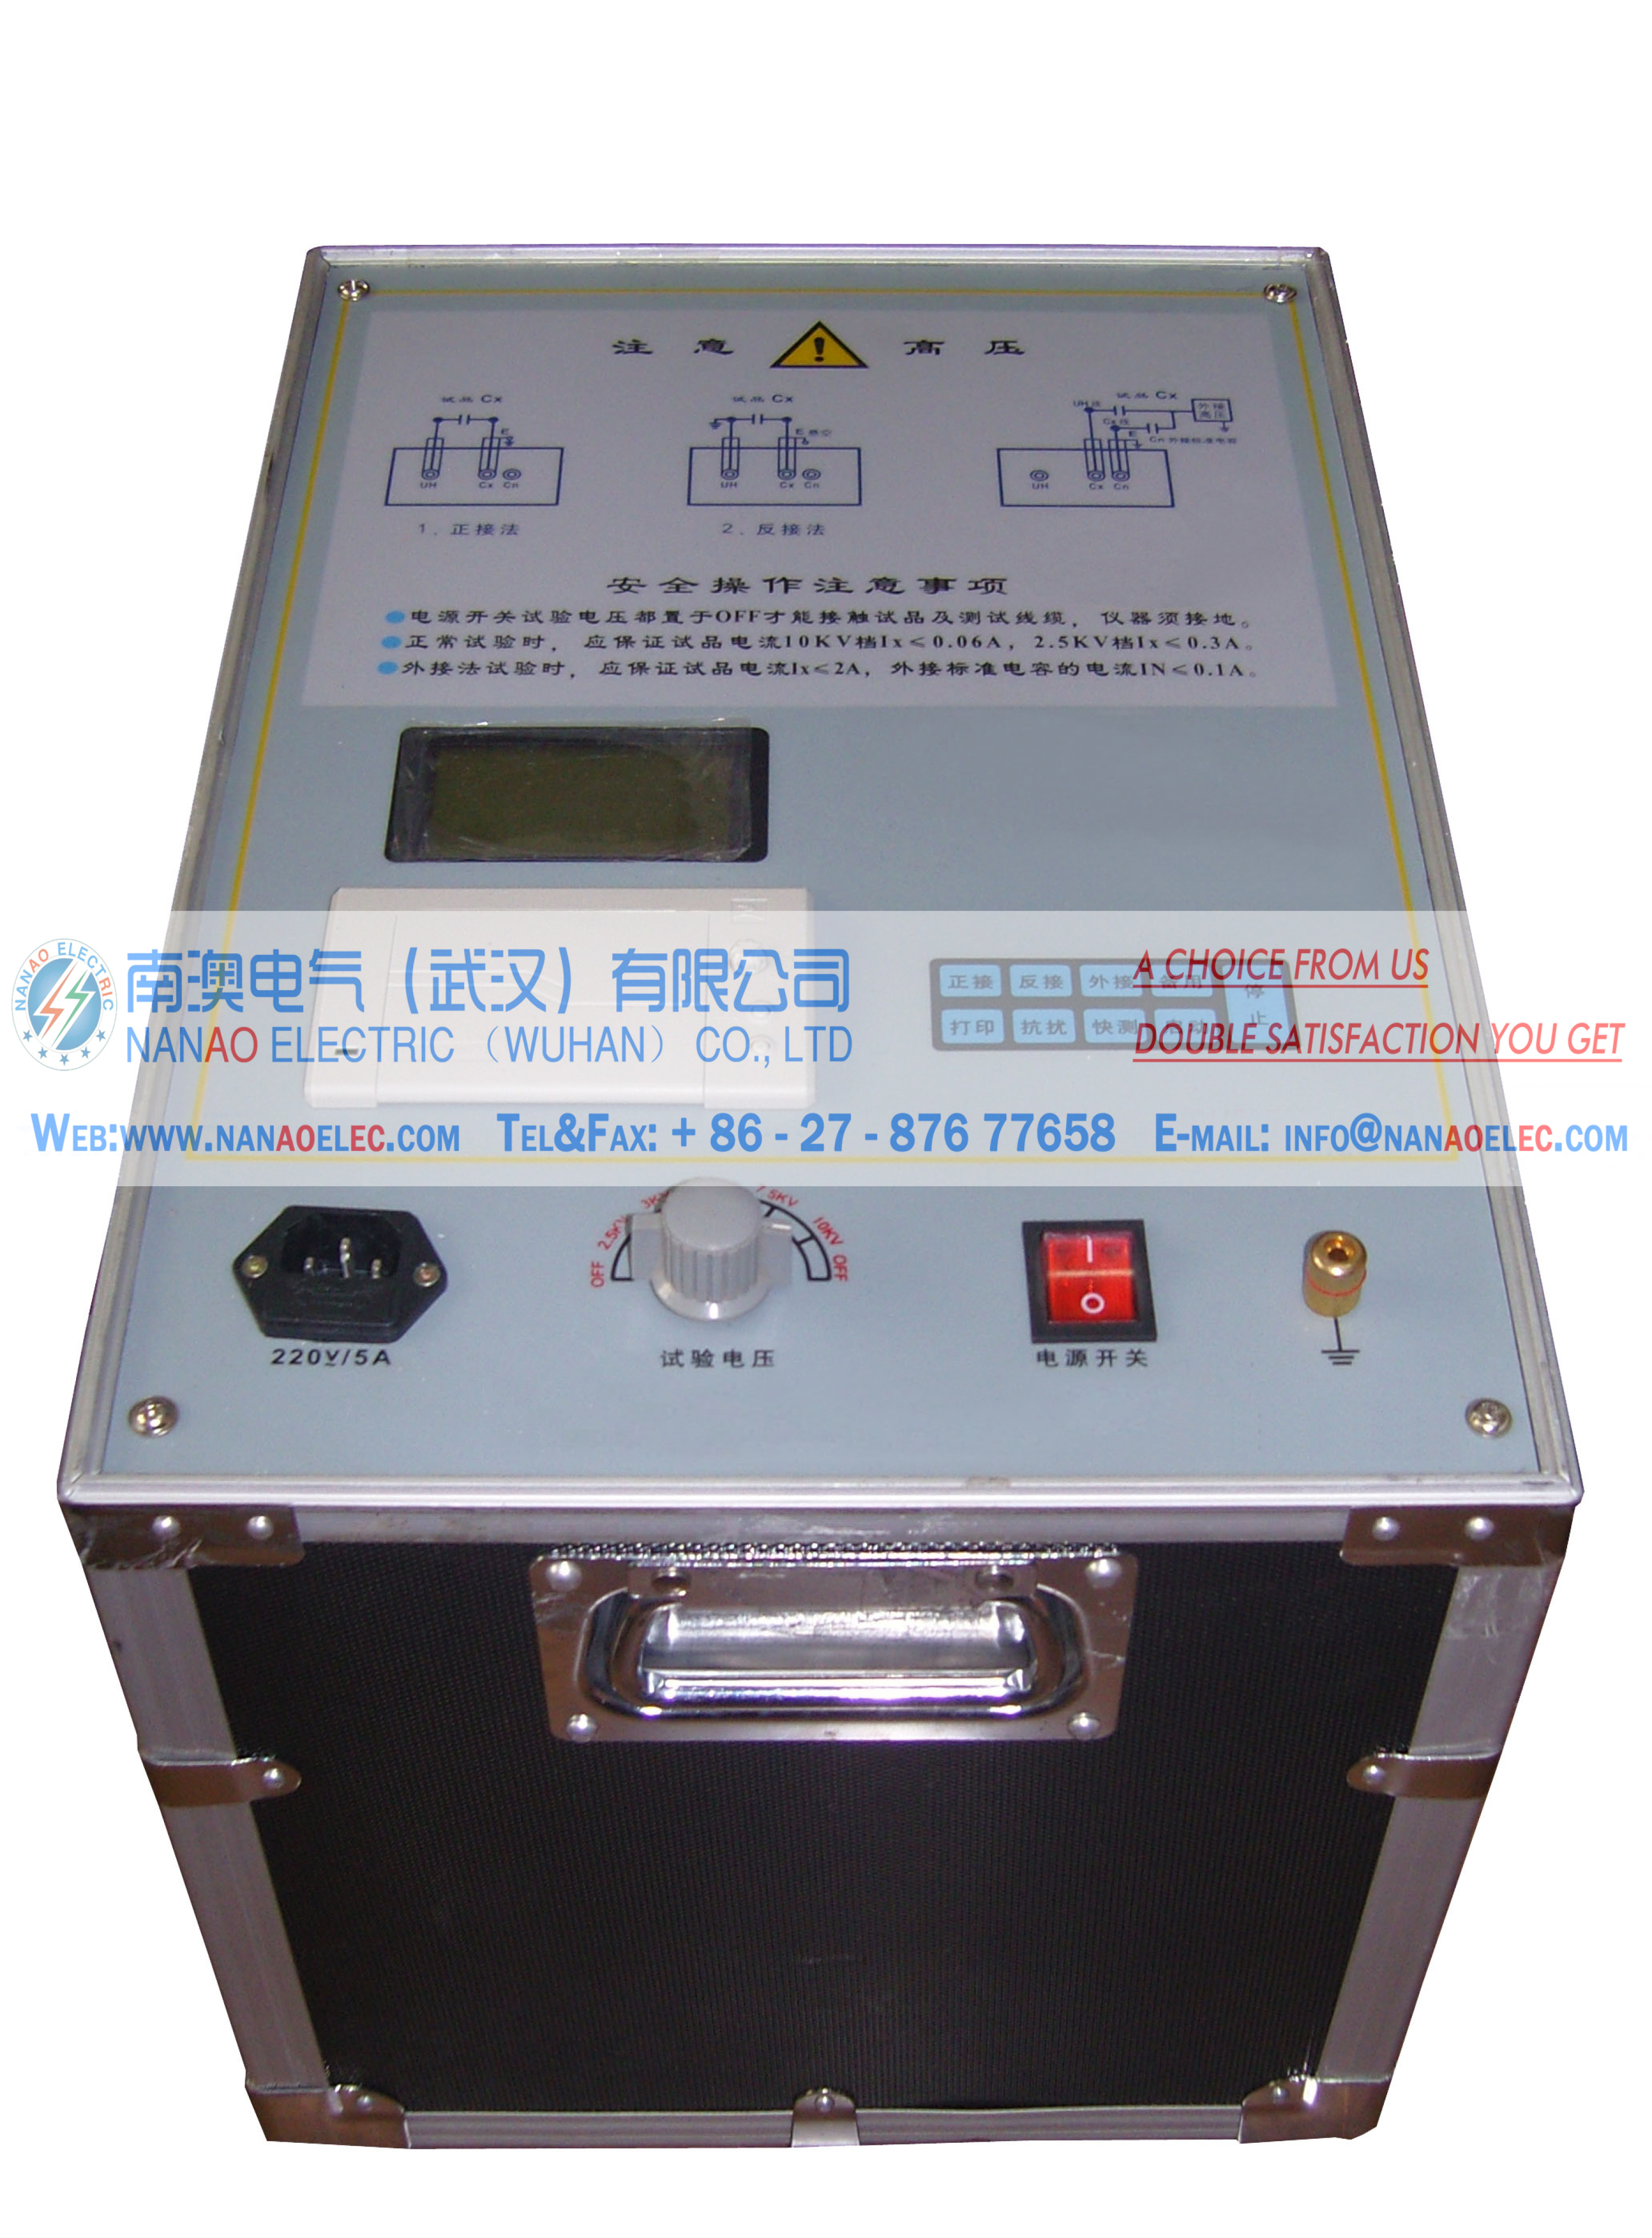 NAWGS-8 Automatic Anti-interference Pilot Frequency Dielectric Loss tester